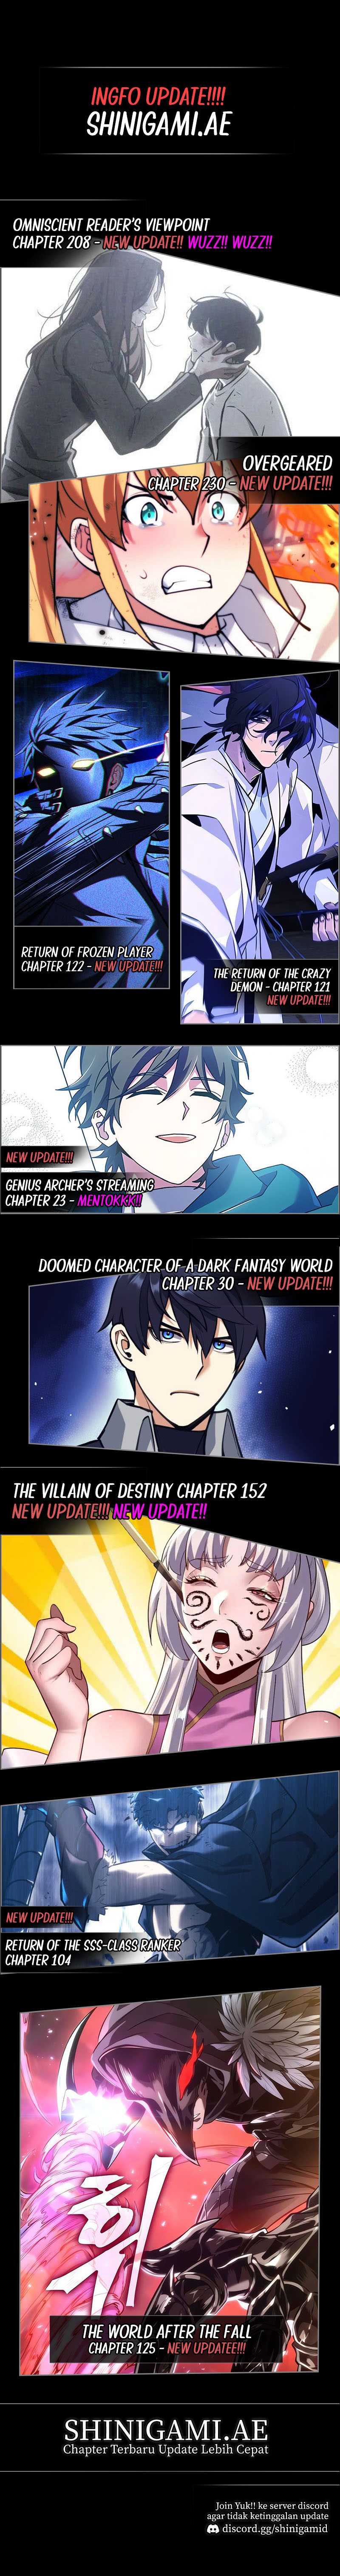 The Regressed Demon Lord Is Kind Chapter 30